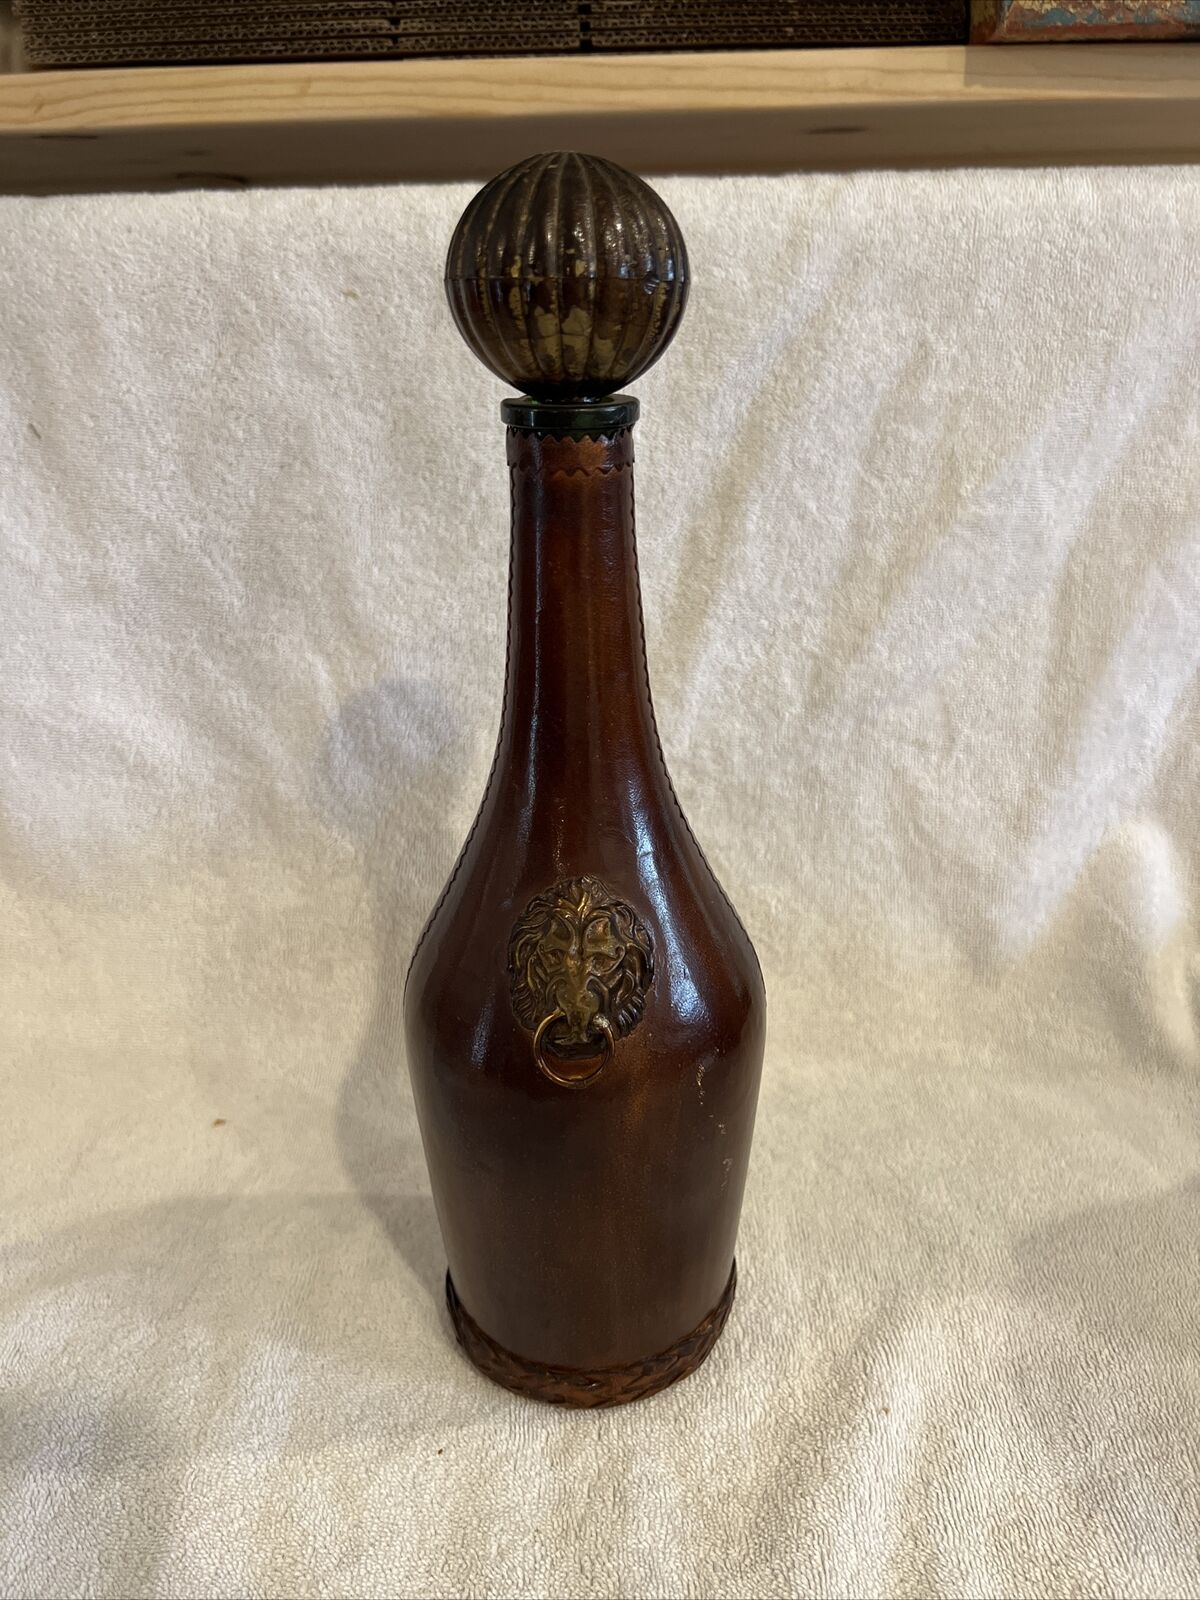 Vintage Italian Leather Wrapped Decanter Bottle With Lions Head Knockers